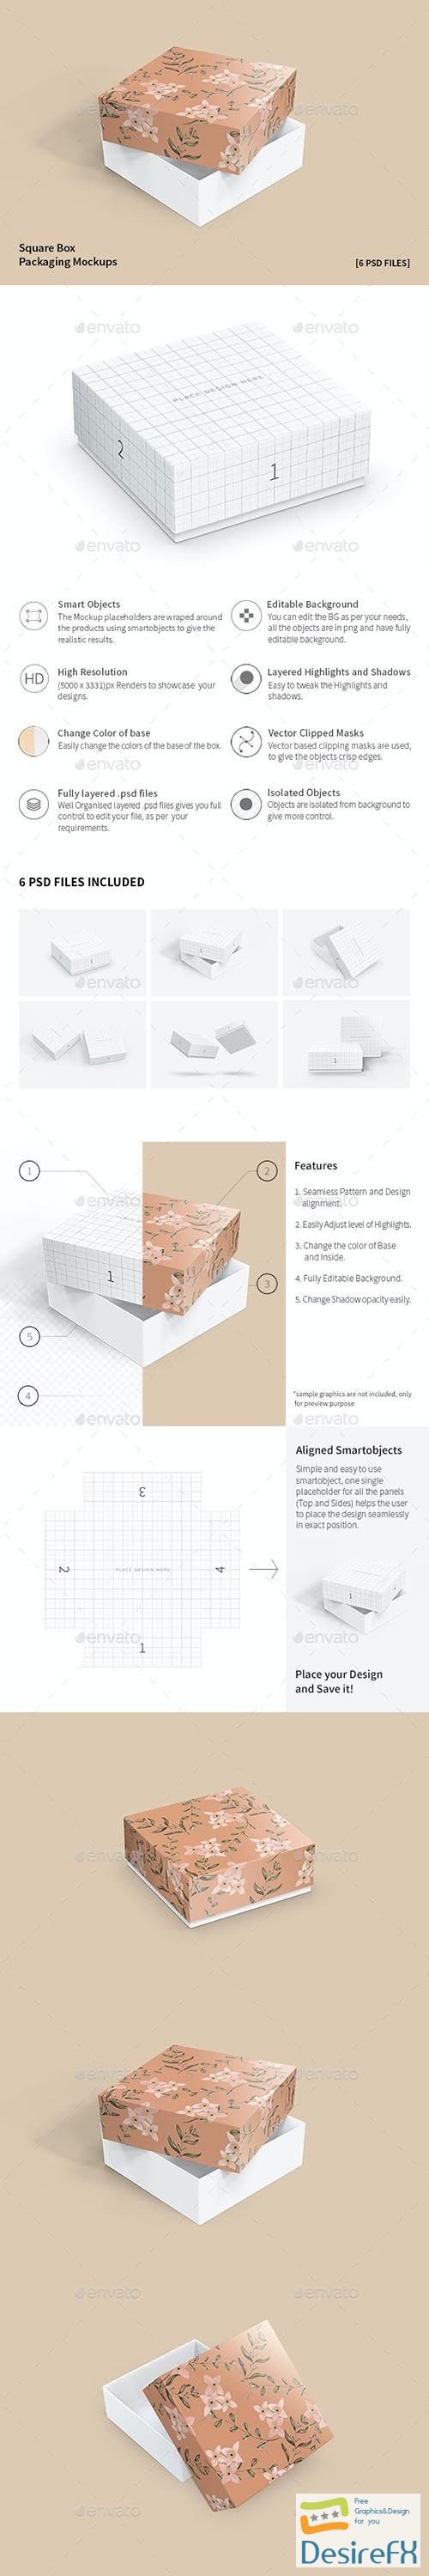 GraphicRiver - Square Box Packaging Mockups 32358611